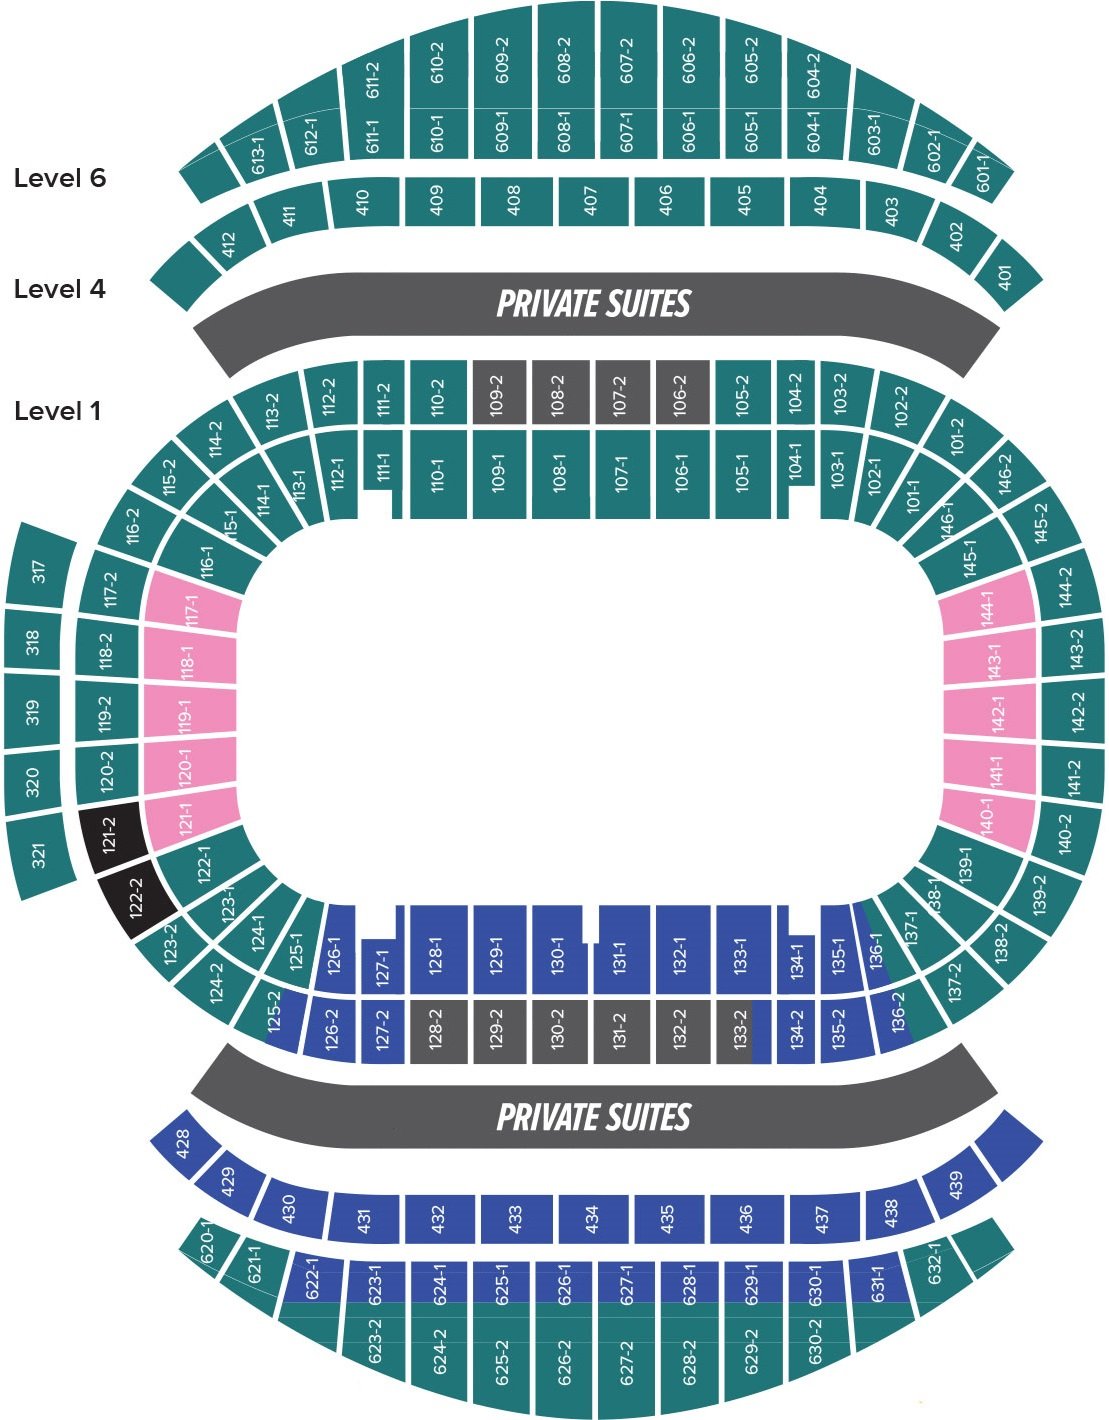 Accor Stadium Australia Seating Map with Stands and Rows